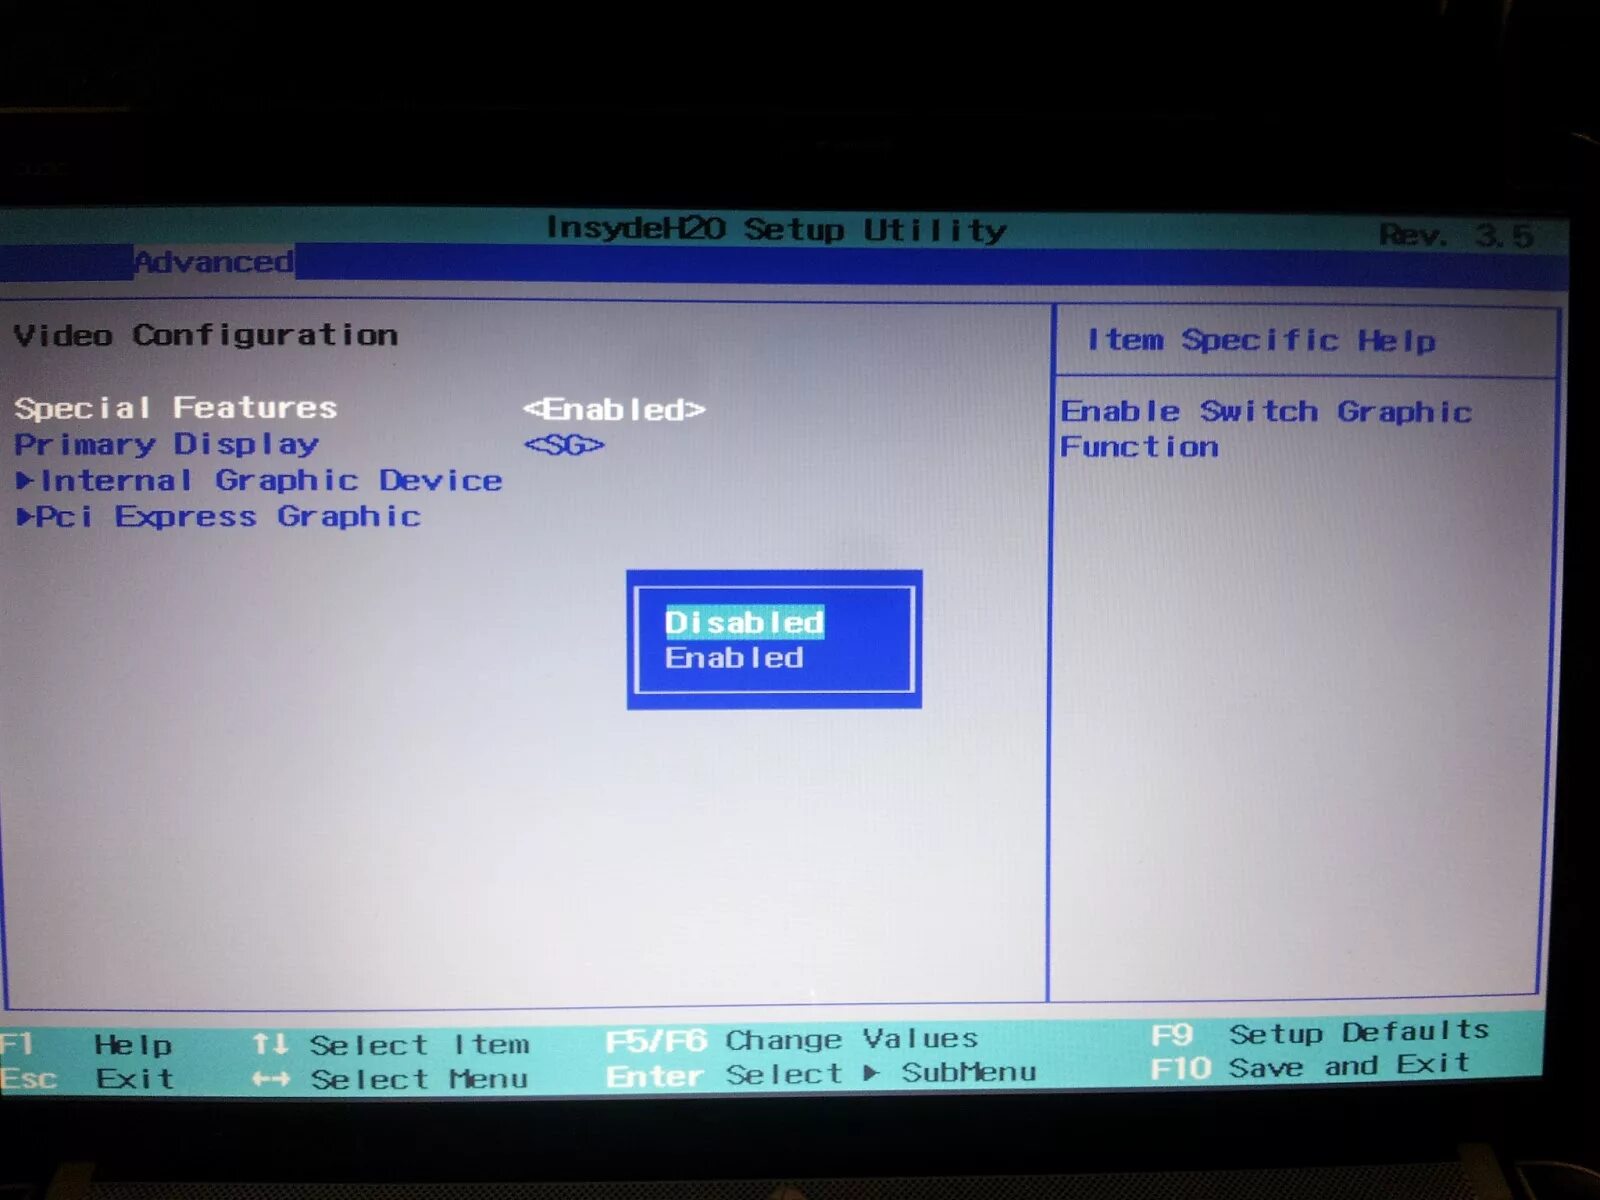 BIOS insydeh20 Hasee. Insydeh20 BIOS Rev 3.5 Advanced. Insydeh20 fb1 3.3. Insydeh20 Setup Utility 1.21.